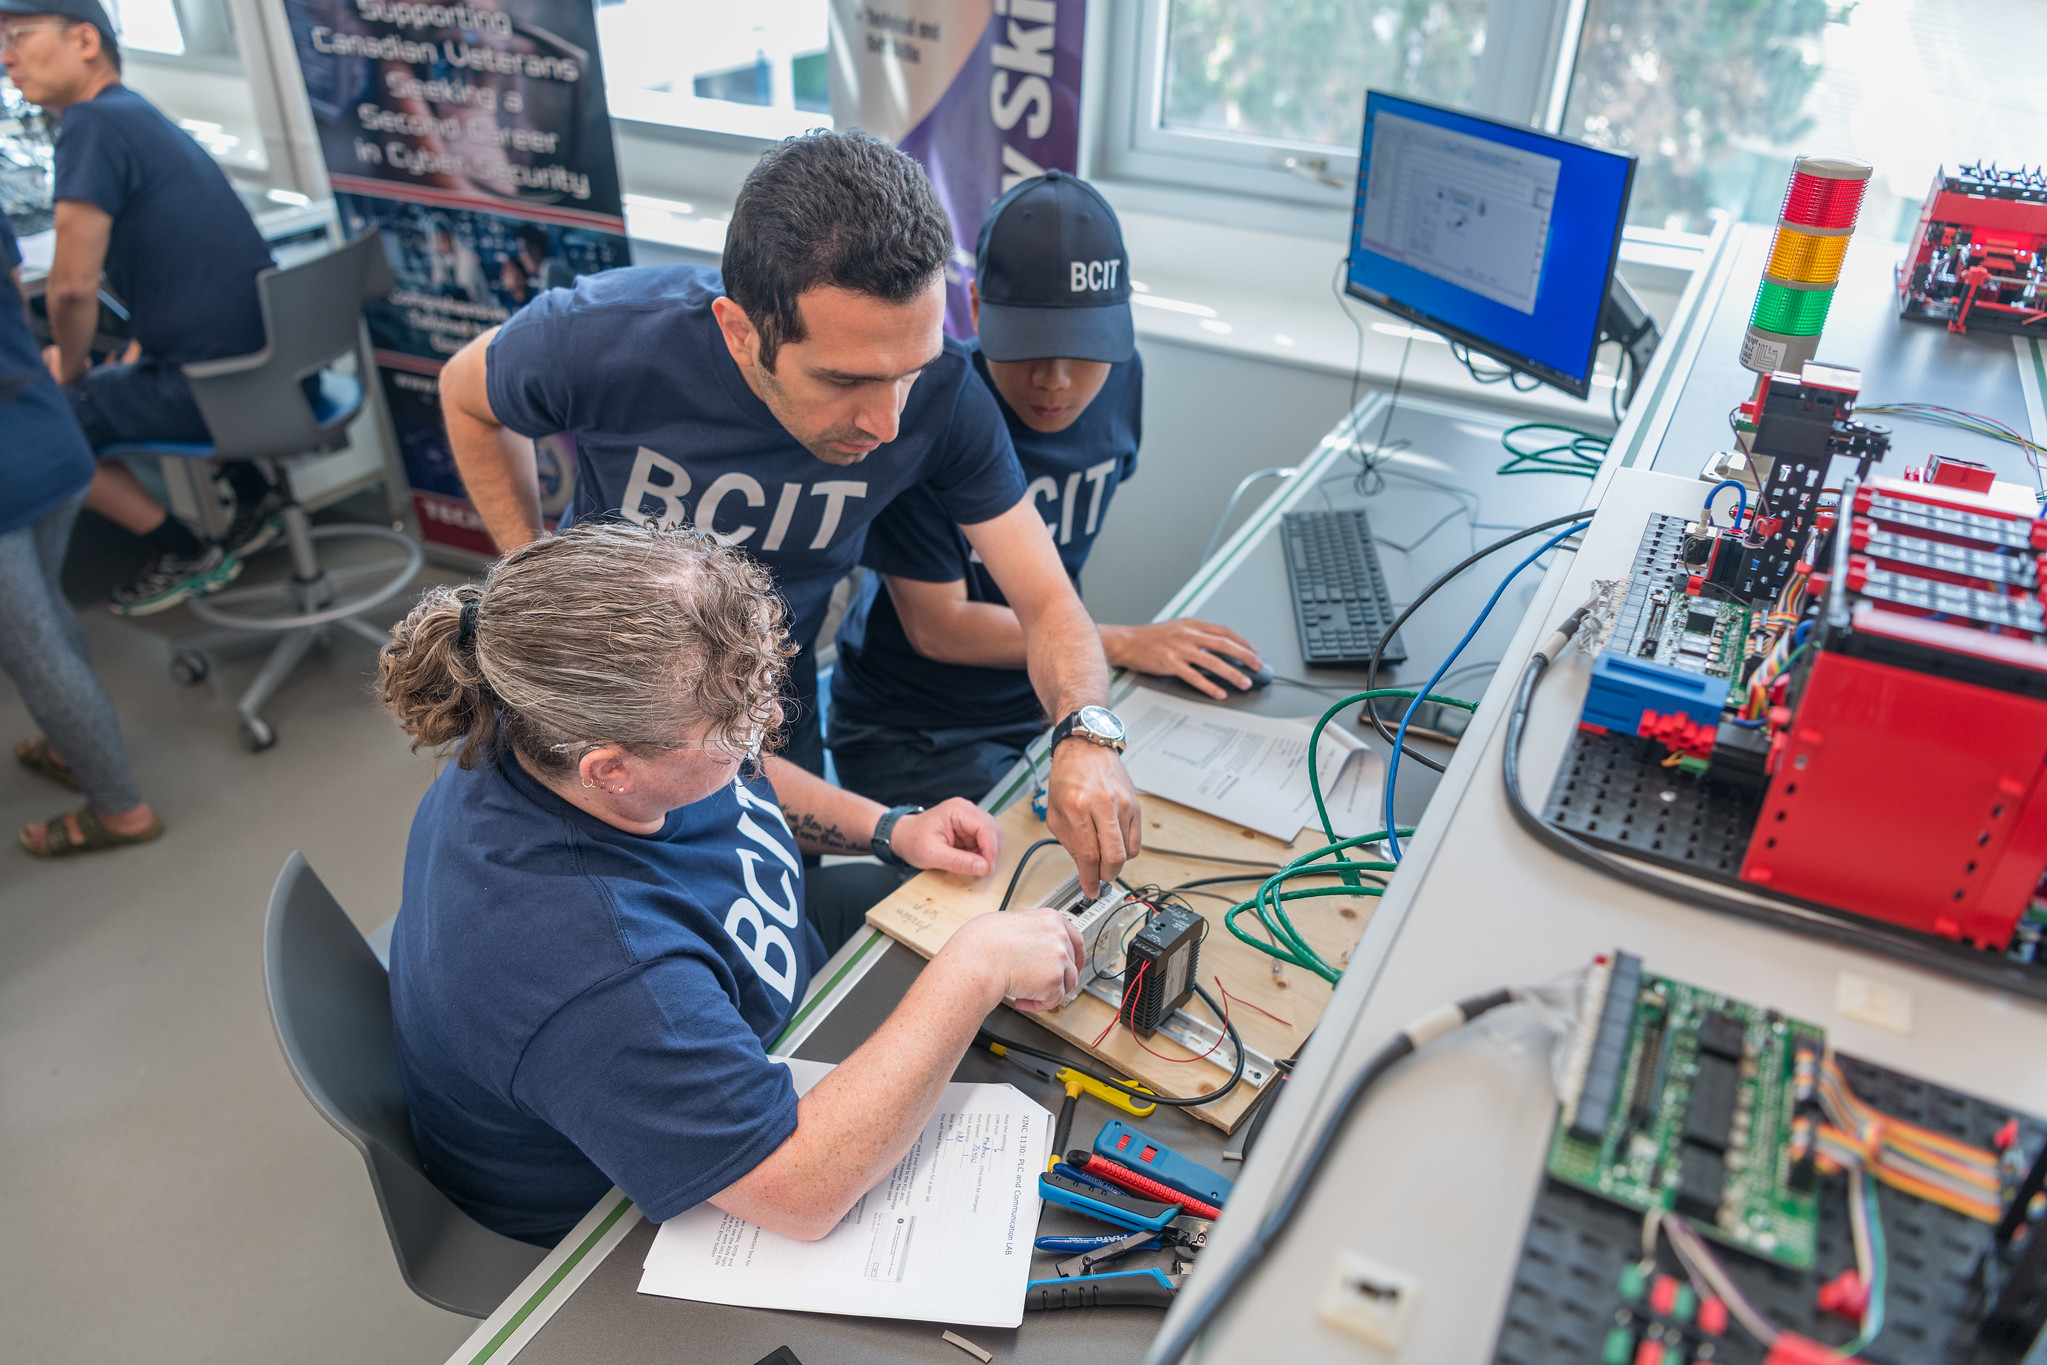 The BCIT Military Skills Conversion Program works to bridge the gap between skilled military members and veterans directly with employers who recognize the skills and attributes they bring to the civilian workforce.